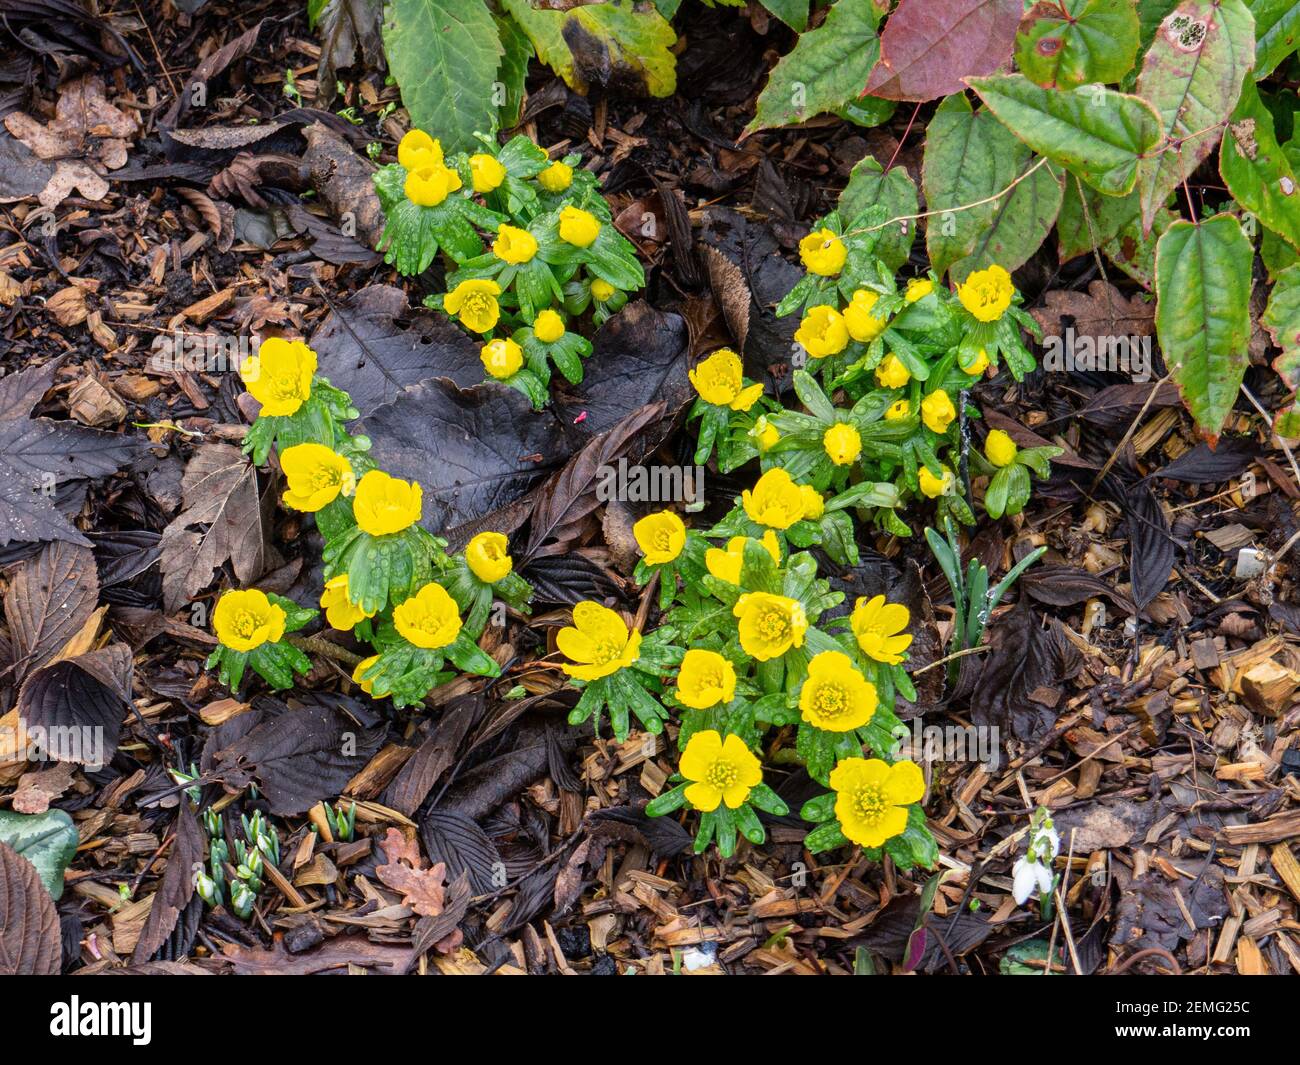 Small clumps of winter aconite Eranthus hyemalis flowering in a woodland bed Stock Photo